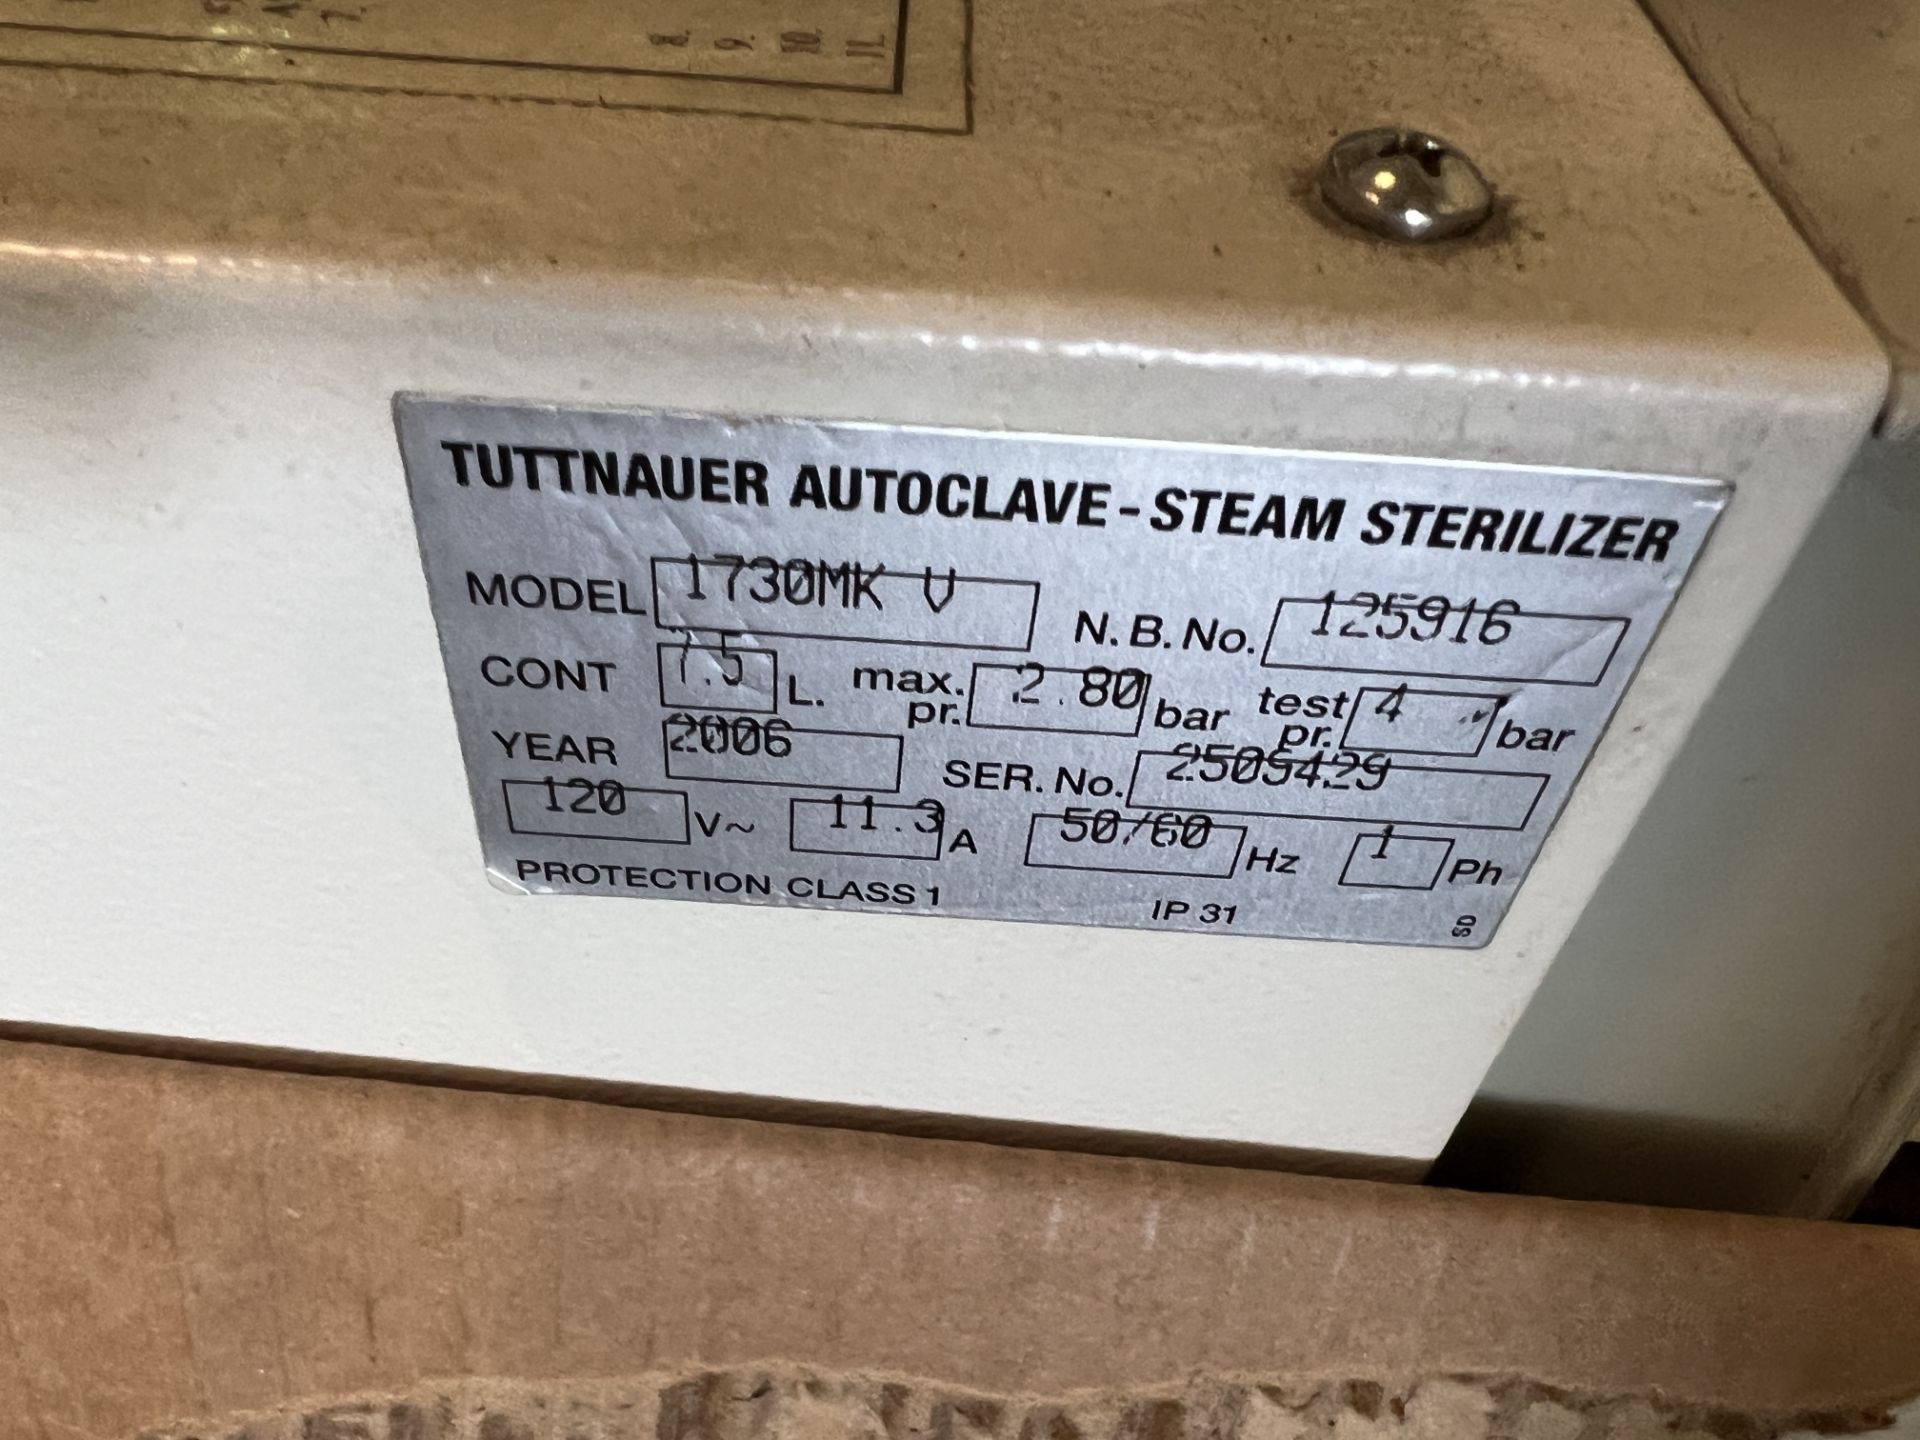 Tuttnauer Valueklave 1730MK-V Table-Top Autoclave, S/N 125916 - Image 2 of 2